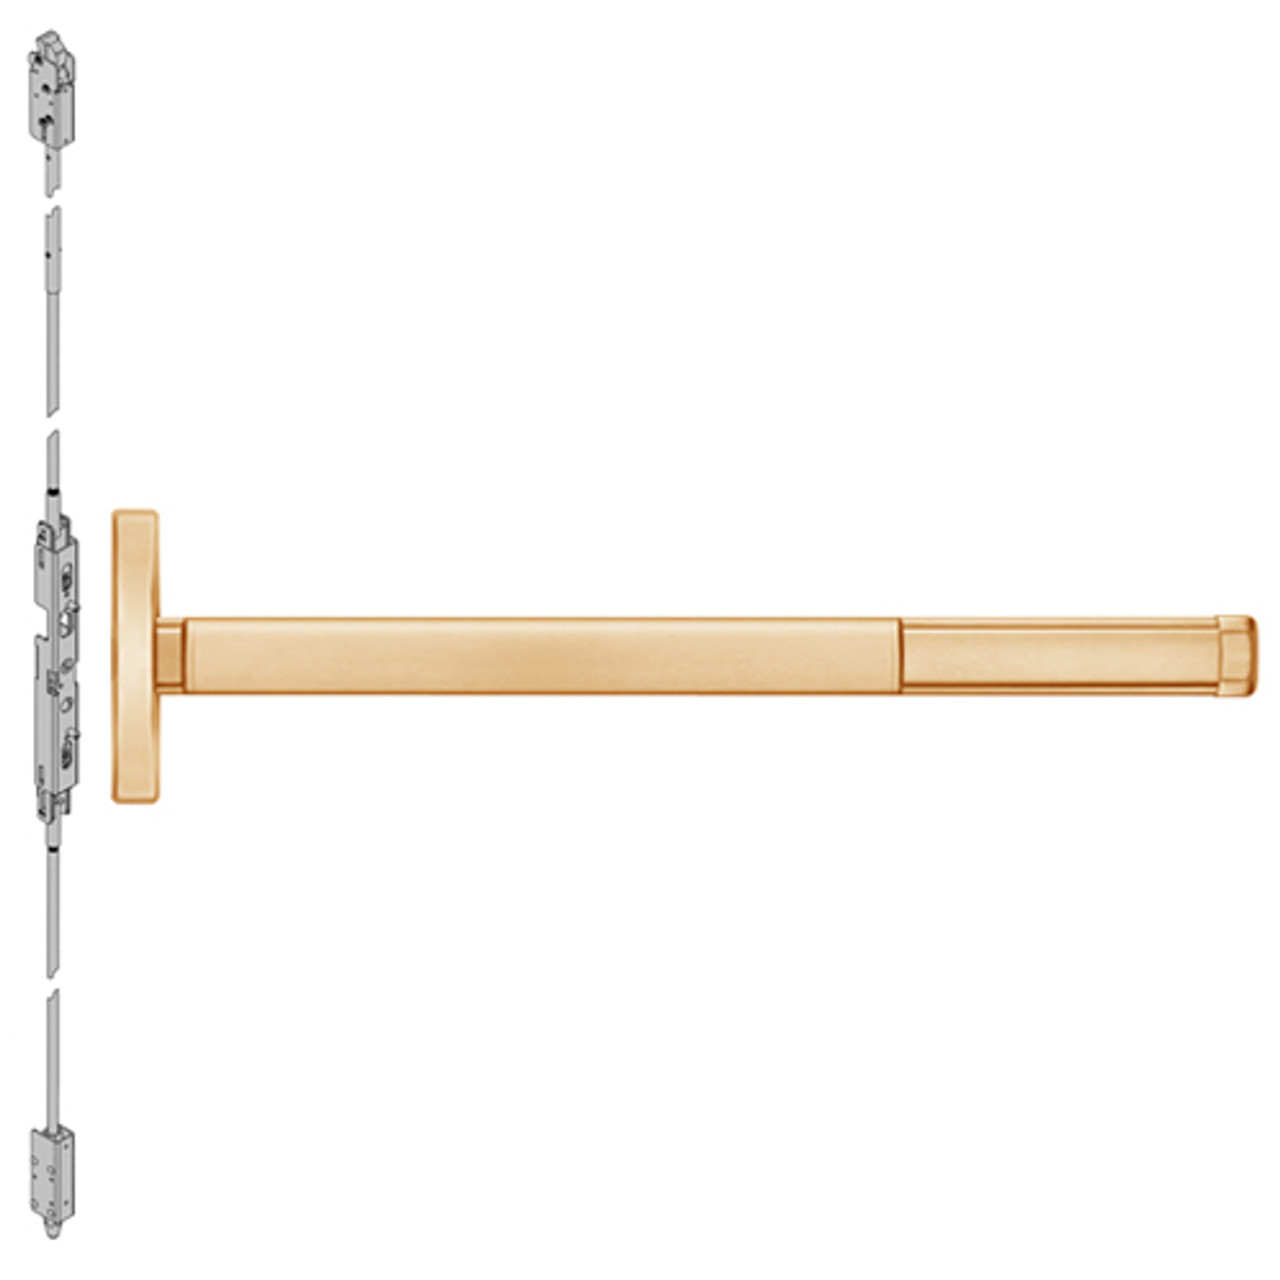 DEFL2608LBR-612-48 PHI 2600 Series Fire Rated Concealed Vertical Rod Exit Device with Delayed Egress Prepped for Key Controls Lever in Satin Bronze Finish